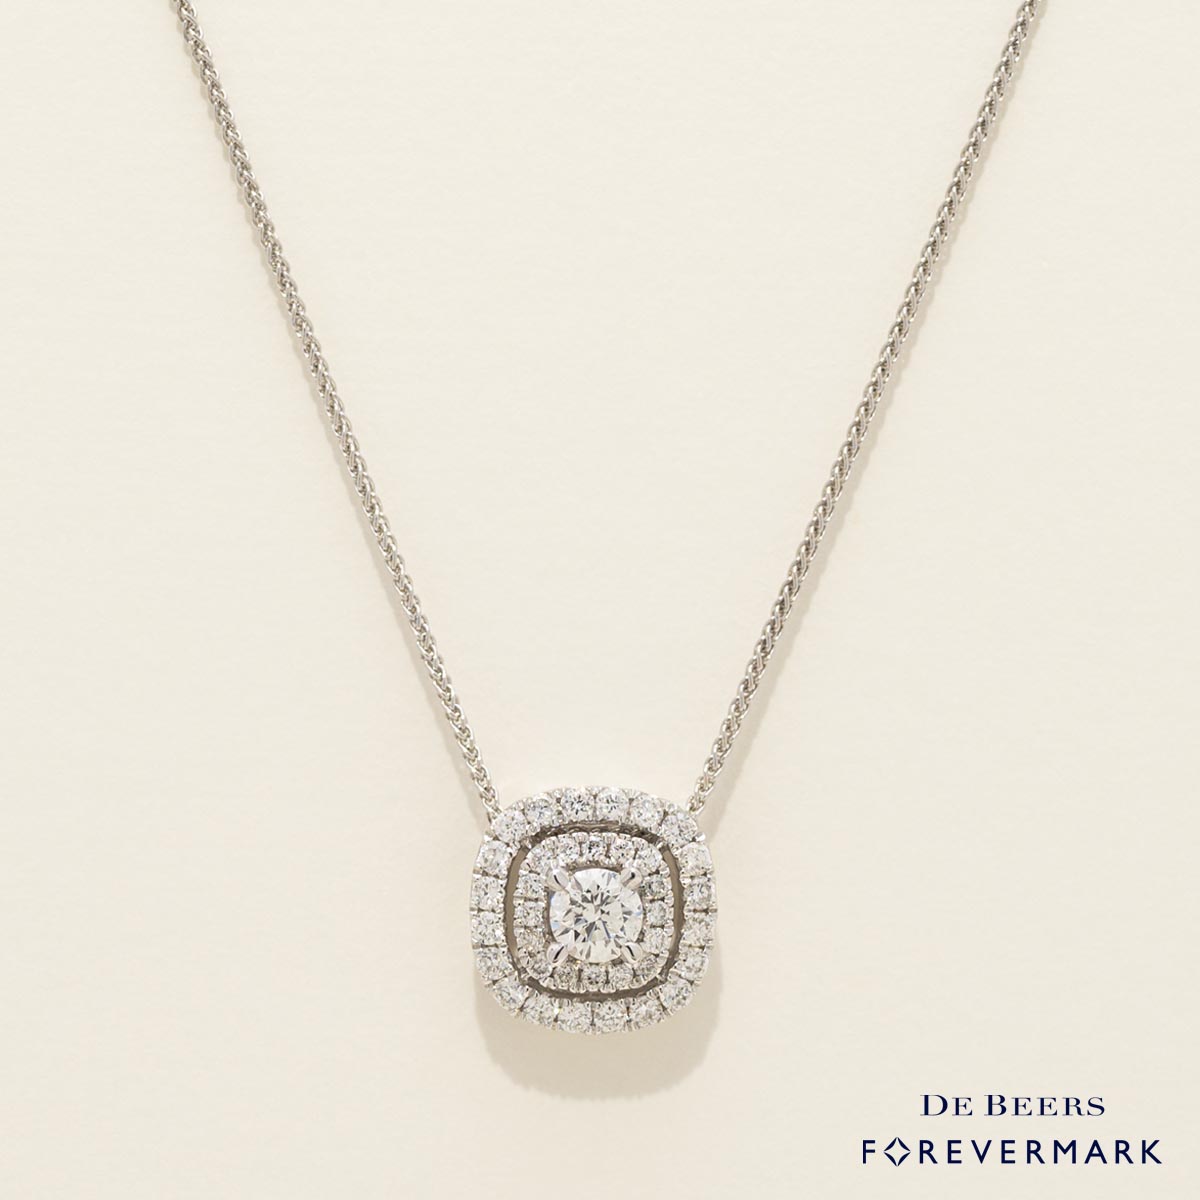 De Beers Forevermark Center of My Universe Diamond Halo Necklace in 18kt White Gold (1/2ct tw)